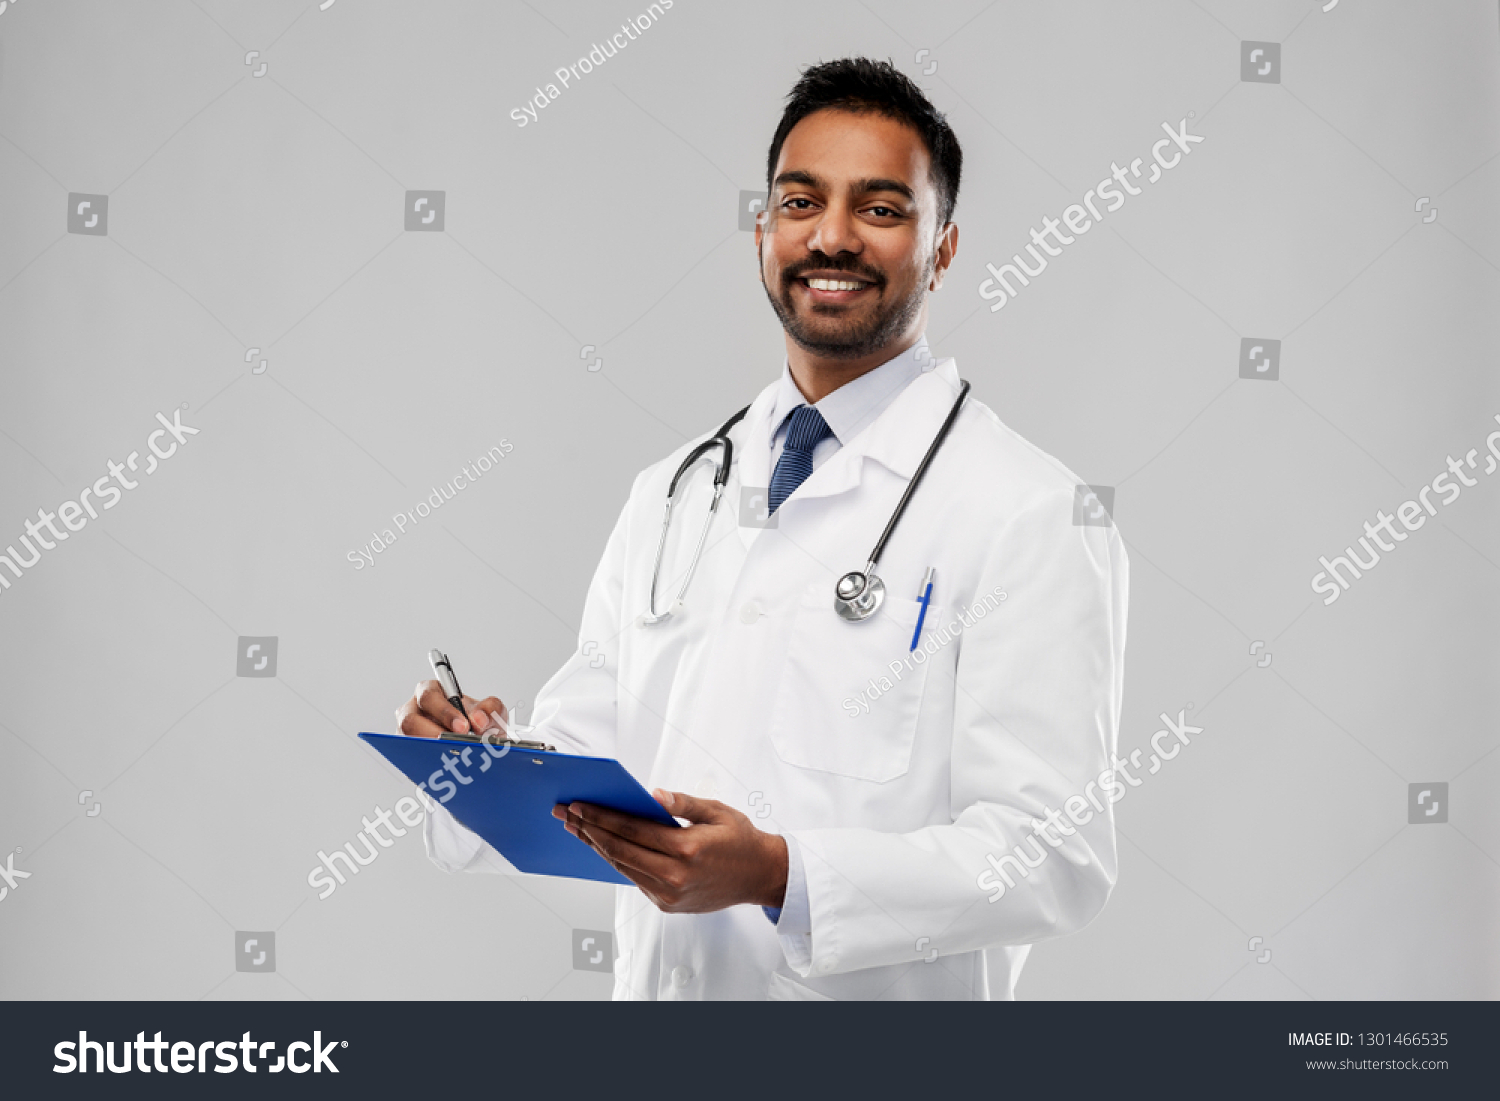 medicine, profession and healthcare concept - smiling indian male doctor in white coat with stethoscope and clipboard over grey background #1301466535